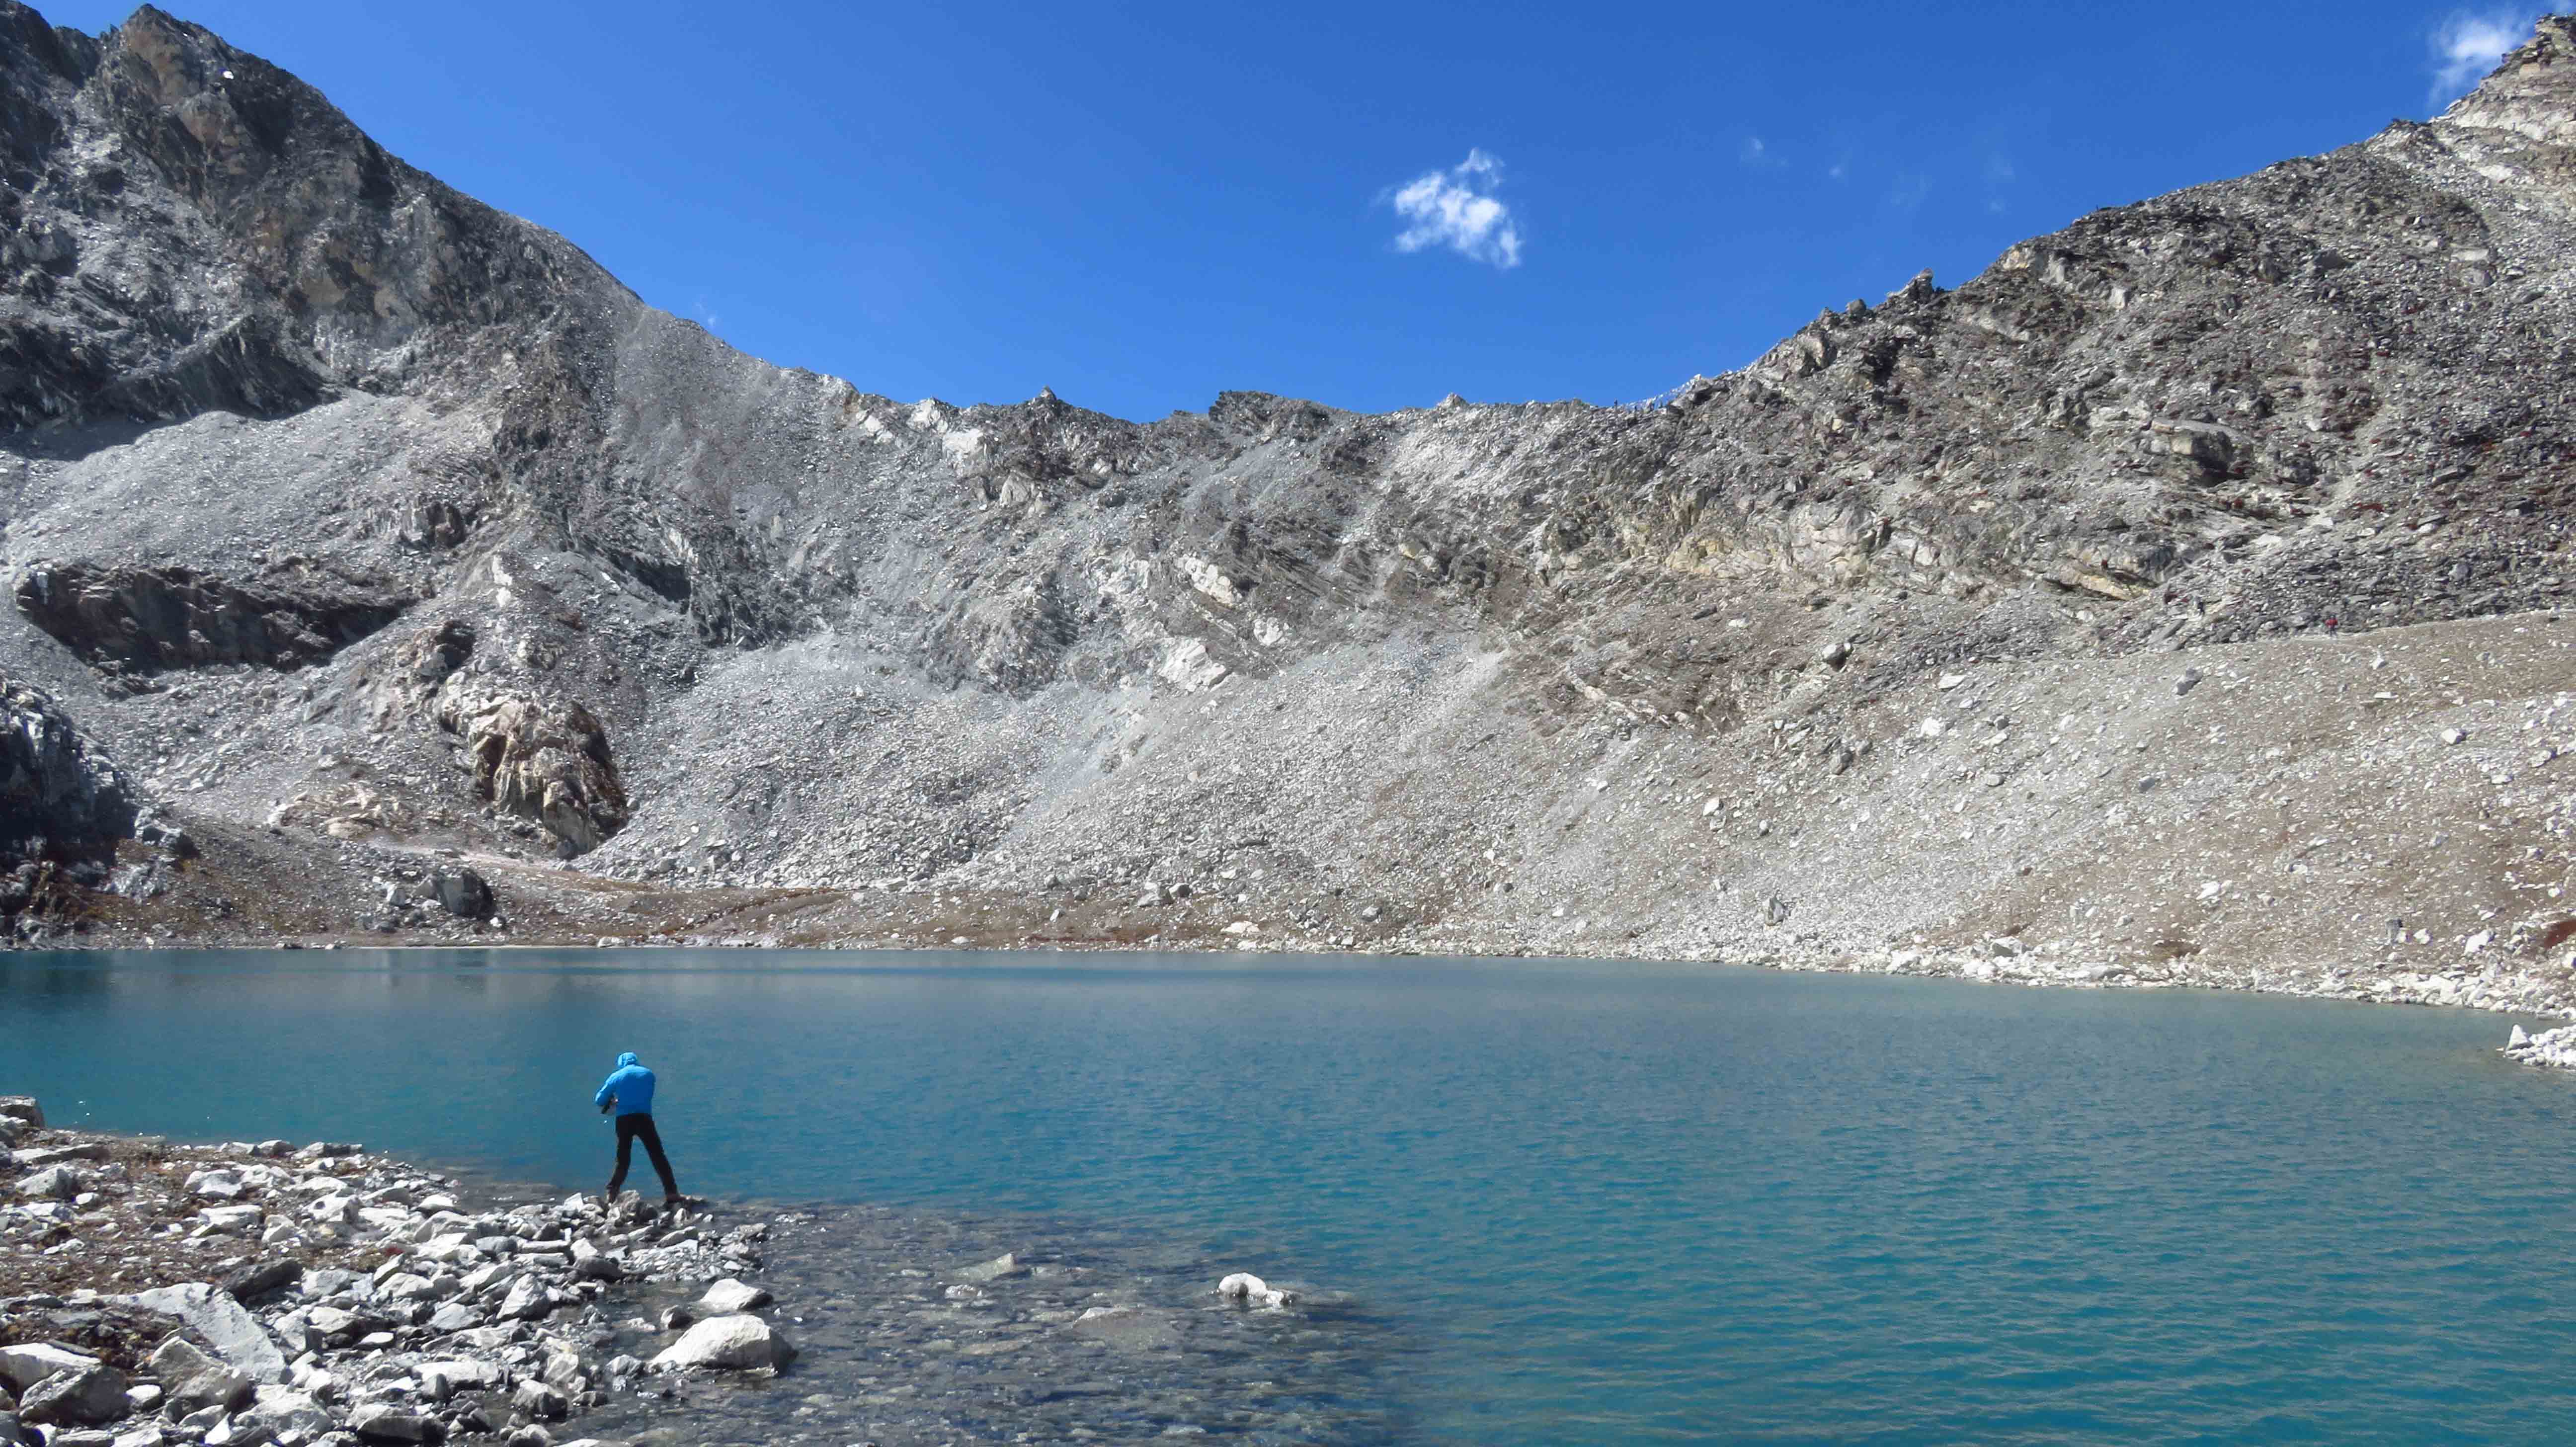 getting water from the kongla ma lake before the ascent everest base camp trek